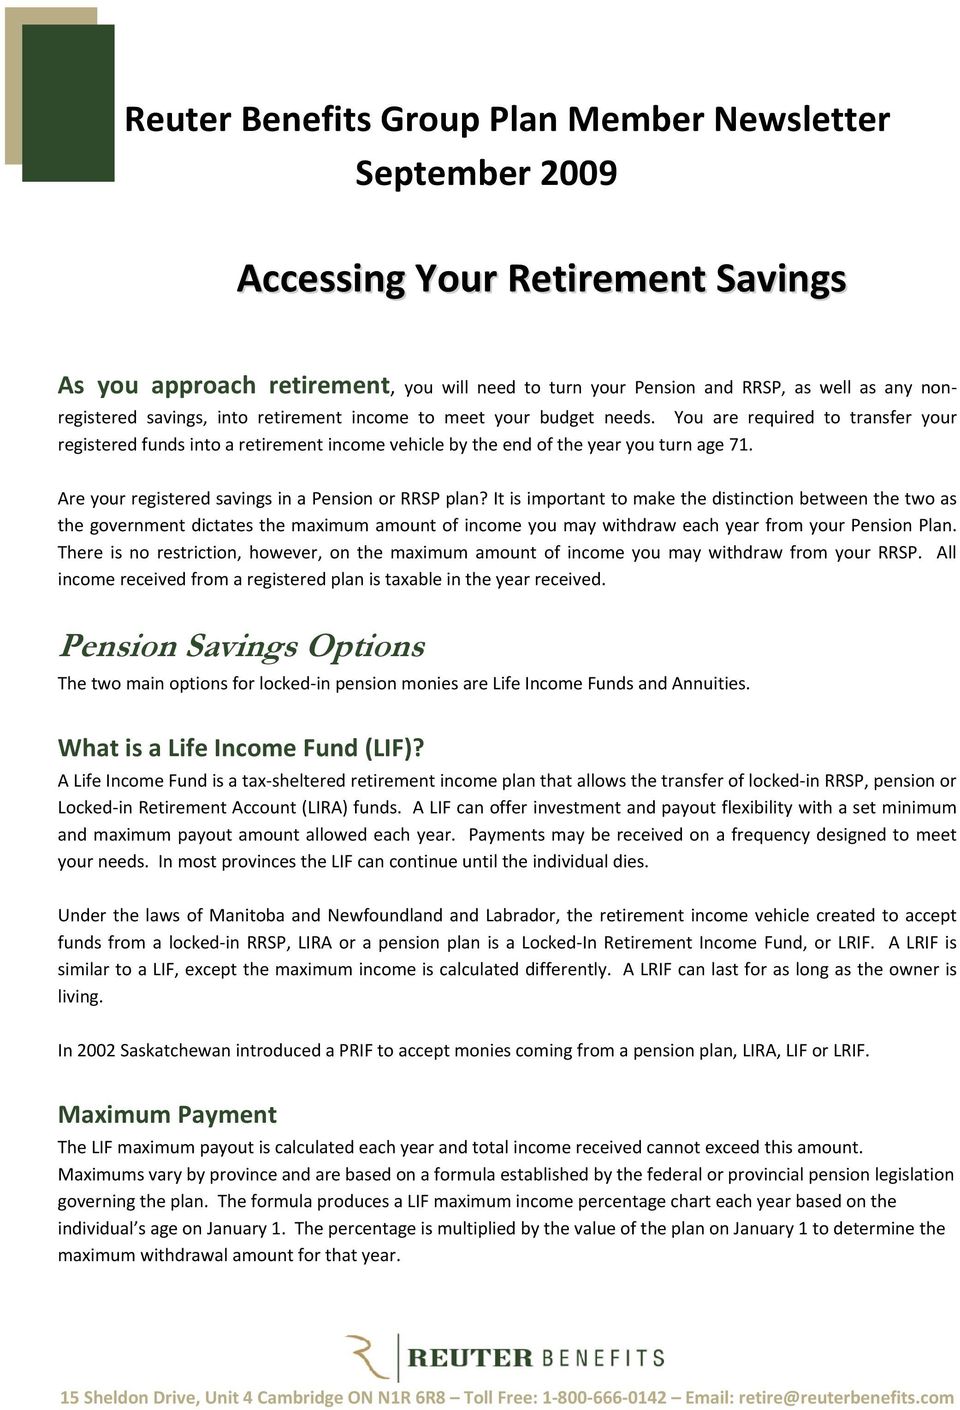 Are your registered savings in a Pension or RRSP plan?